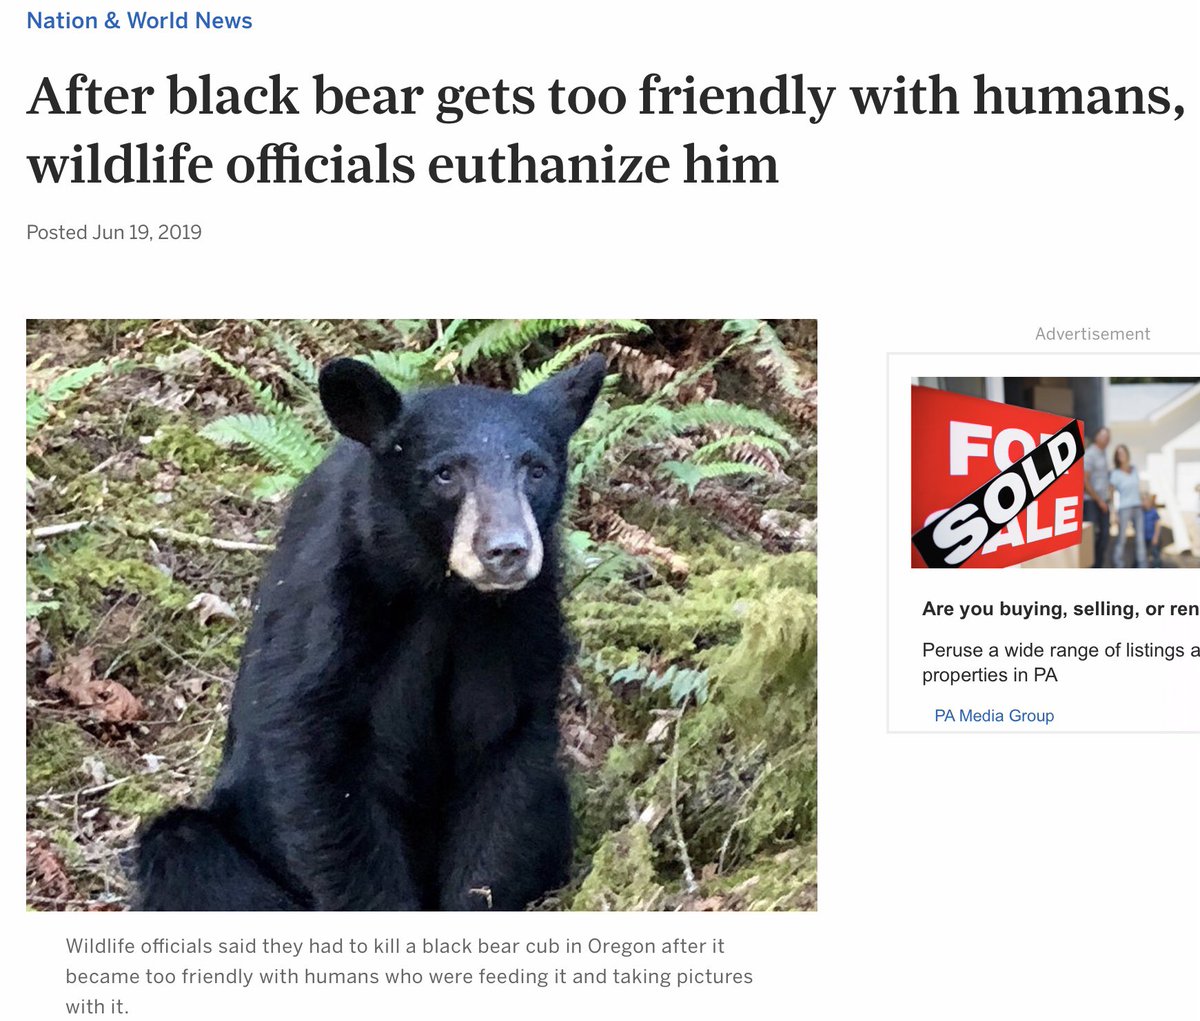 Like you can have sympathy 4 a bear that were exterminated for getting too used 2 humans. Even if the death of the animal were justified/necessary, I suspect most people would find that is a sad situation, &feel sorry 4 the animal... but some people don’t.